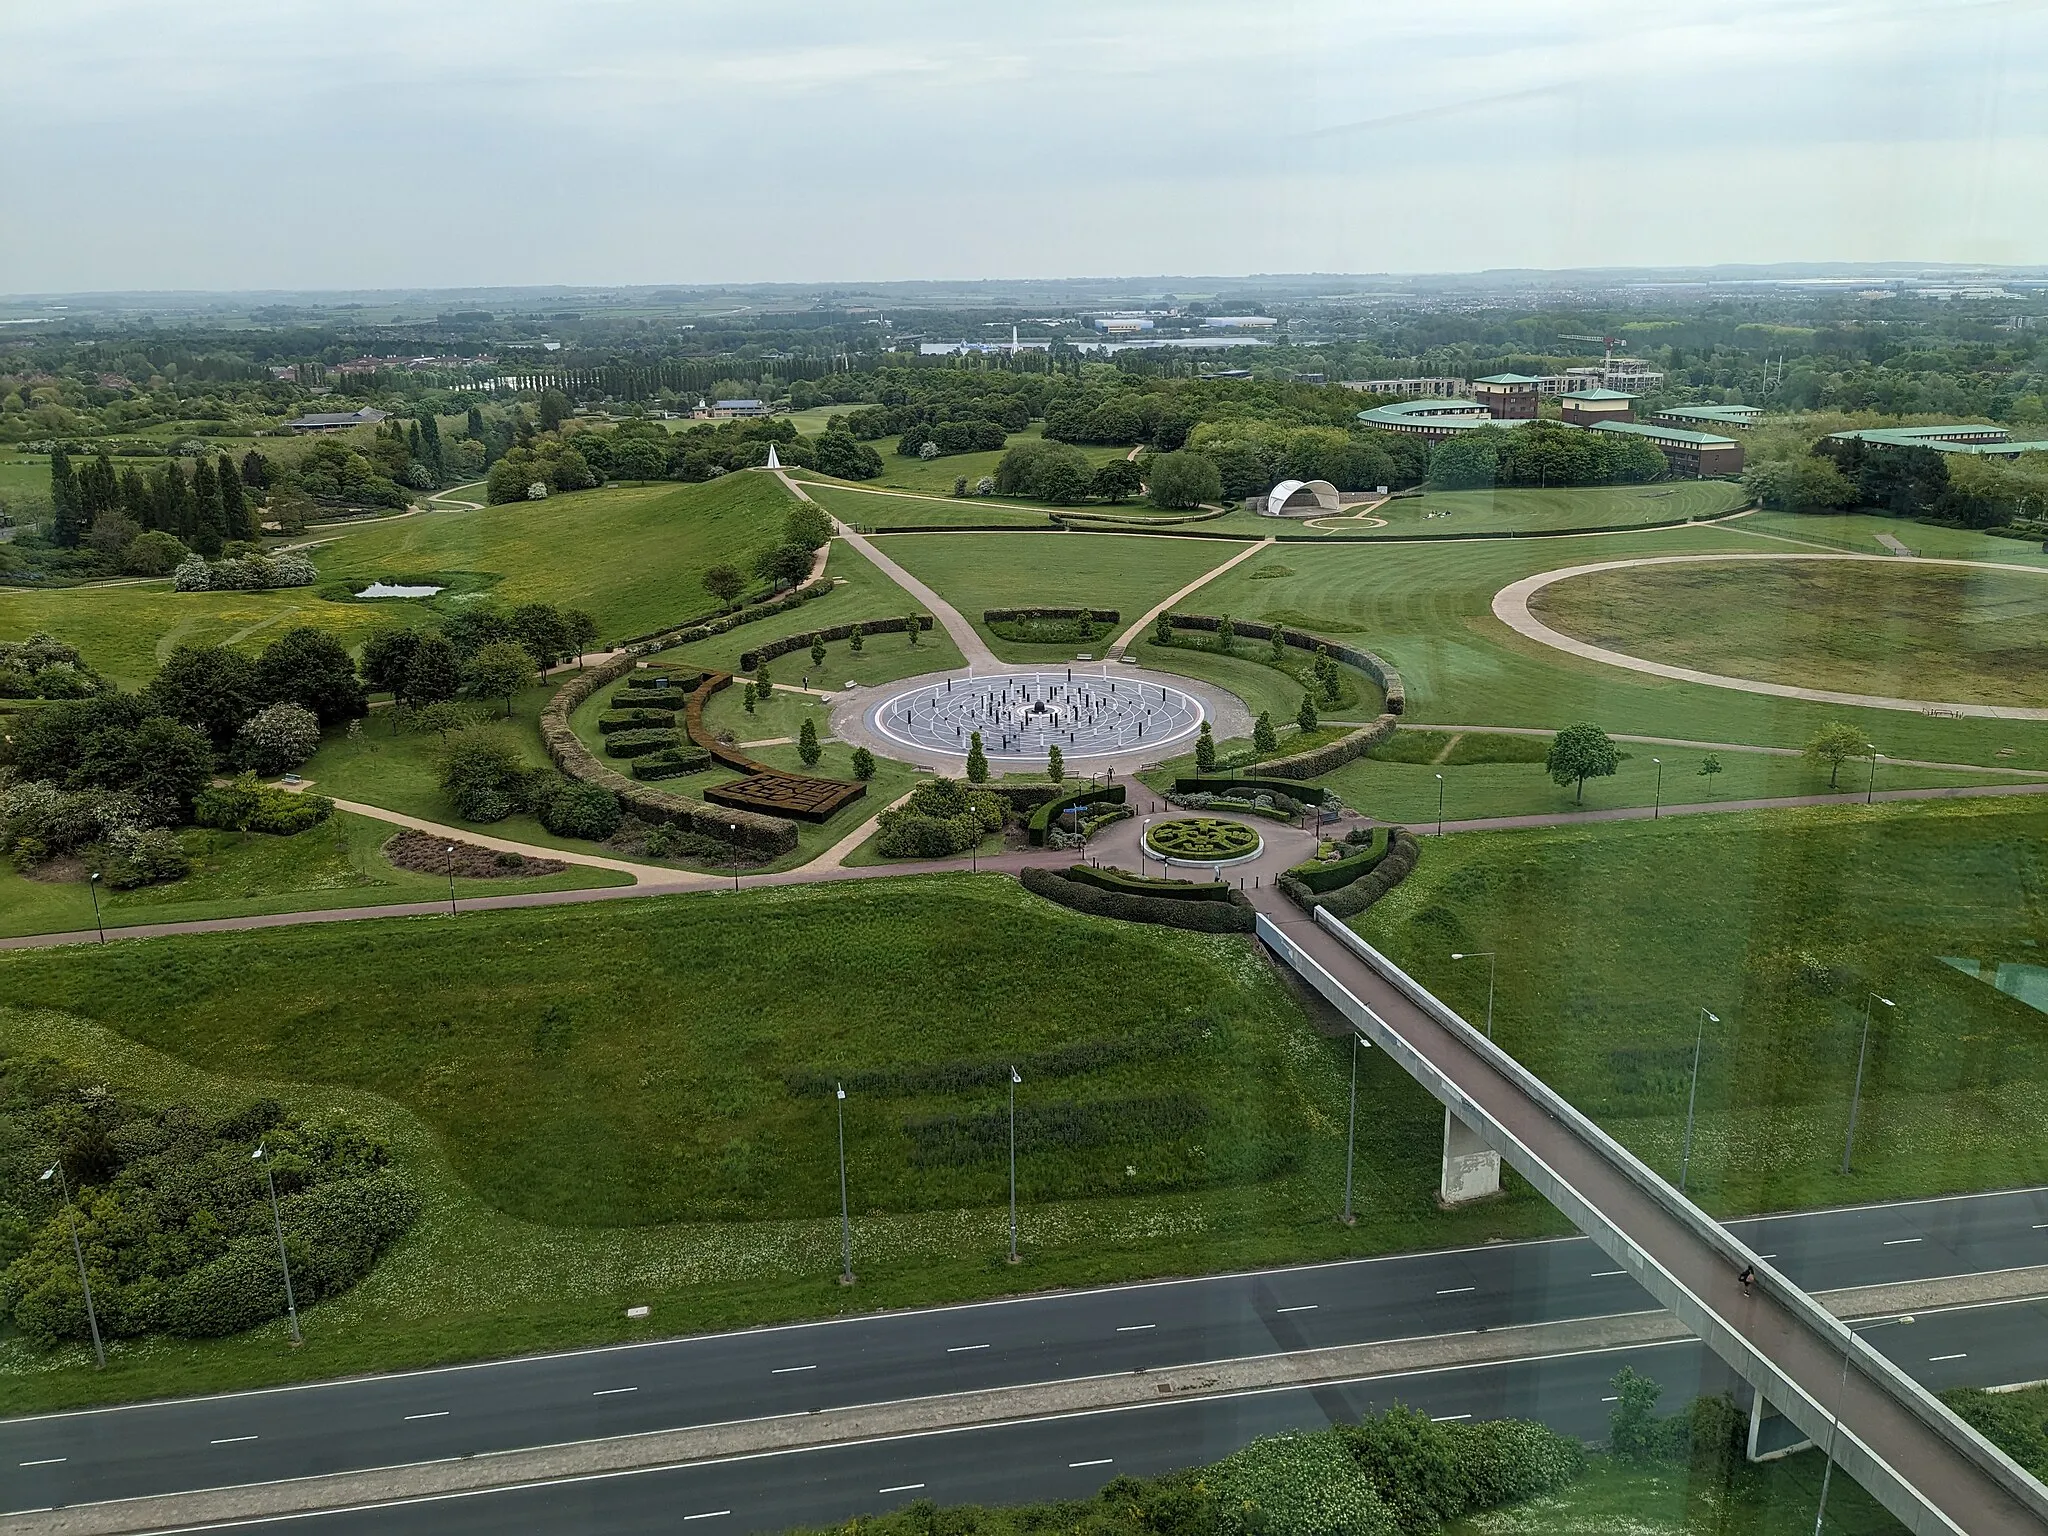 Photo showing: In the foreground (in cutting), Marlborough Street; in the middle, the Milton Keynes Rose memorial space; the Belvedere leading to the Light Pyramid (a beacon); in the distance, Willen Lake; on the horizon, Cranfield in Bedfordshire